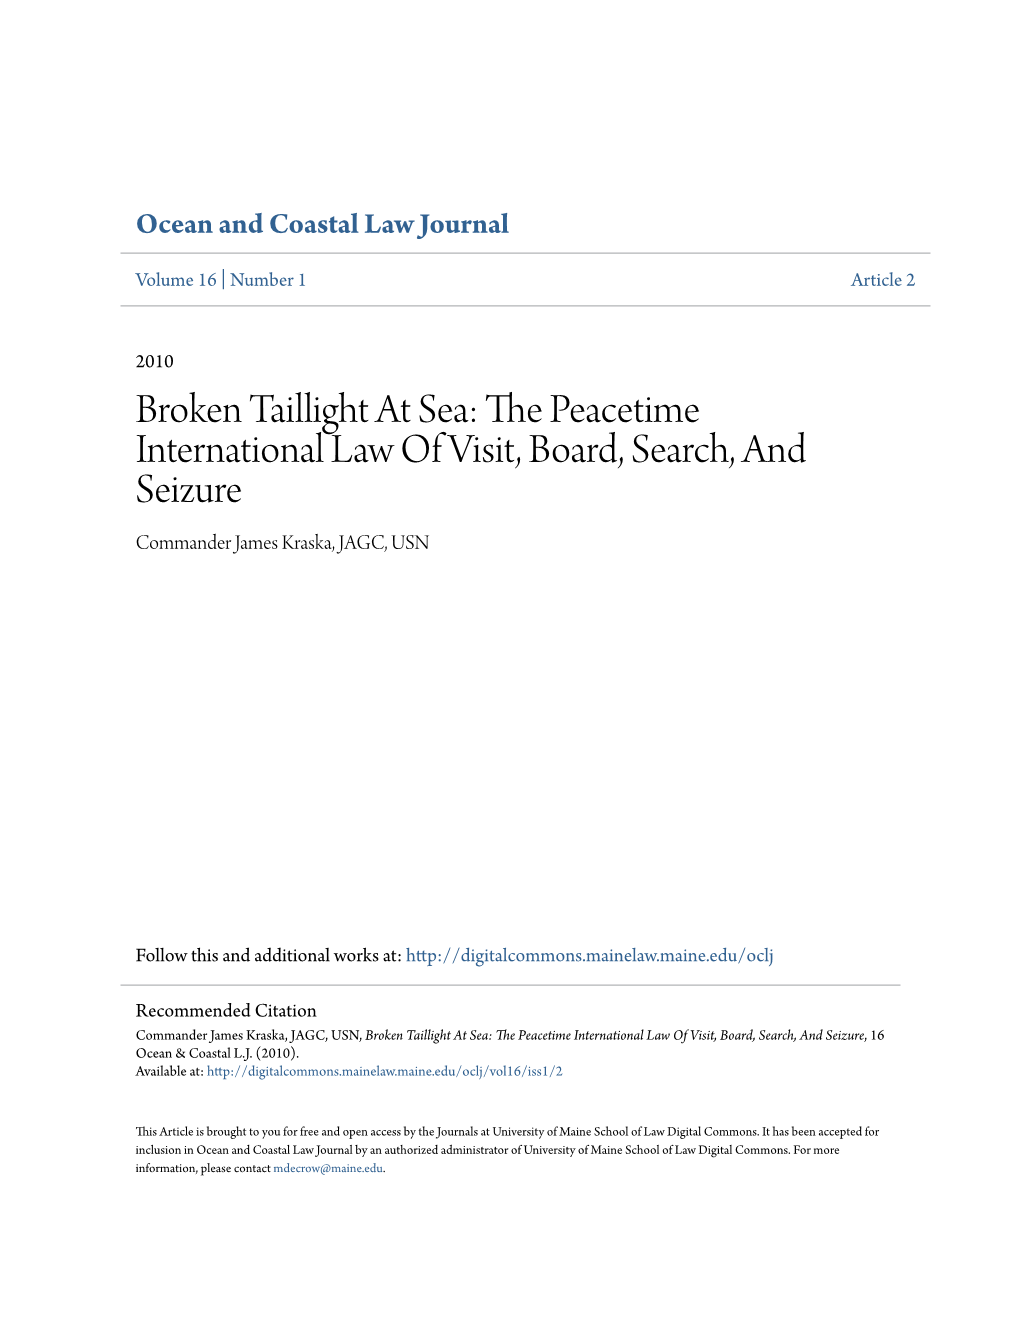 Broken Taillight at Sea: the Peacetime International Law of Visit, Board, Search, and Seizure, 16 Ocean & Coastal L.J